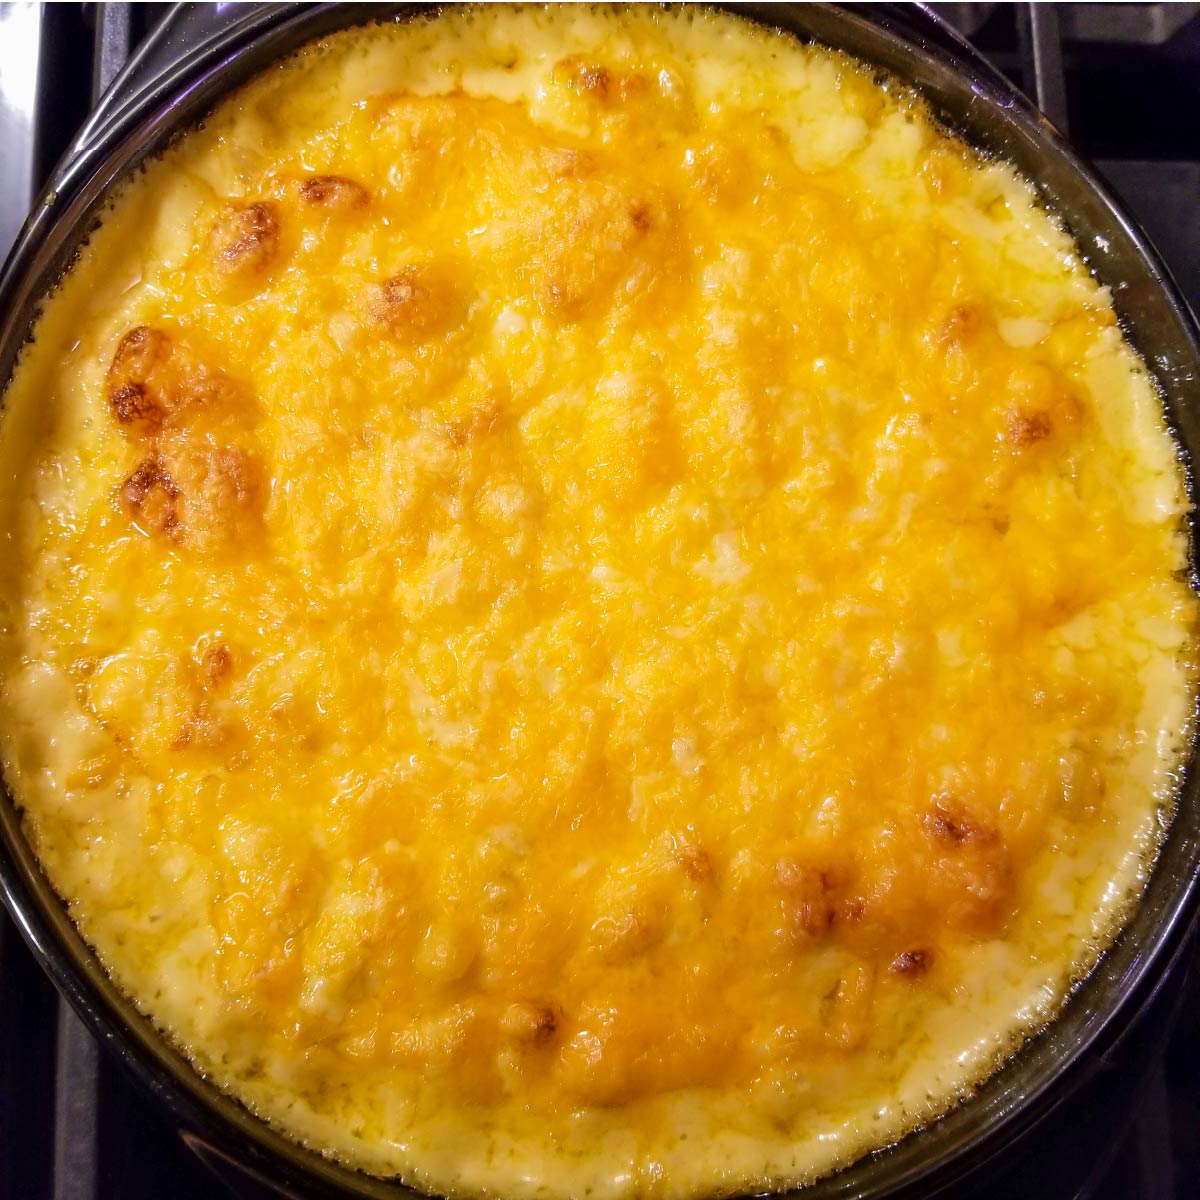 Mac and cheese out of the oven with a layer of cheese melted on top.